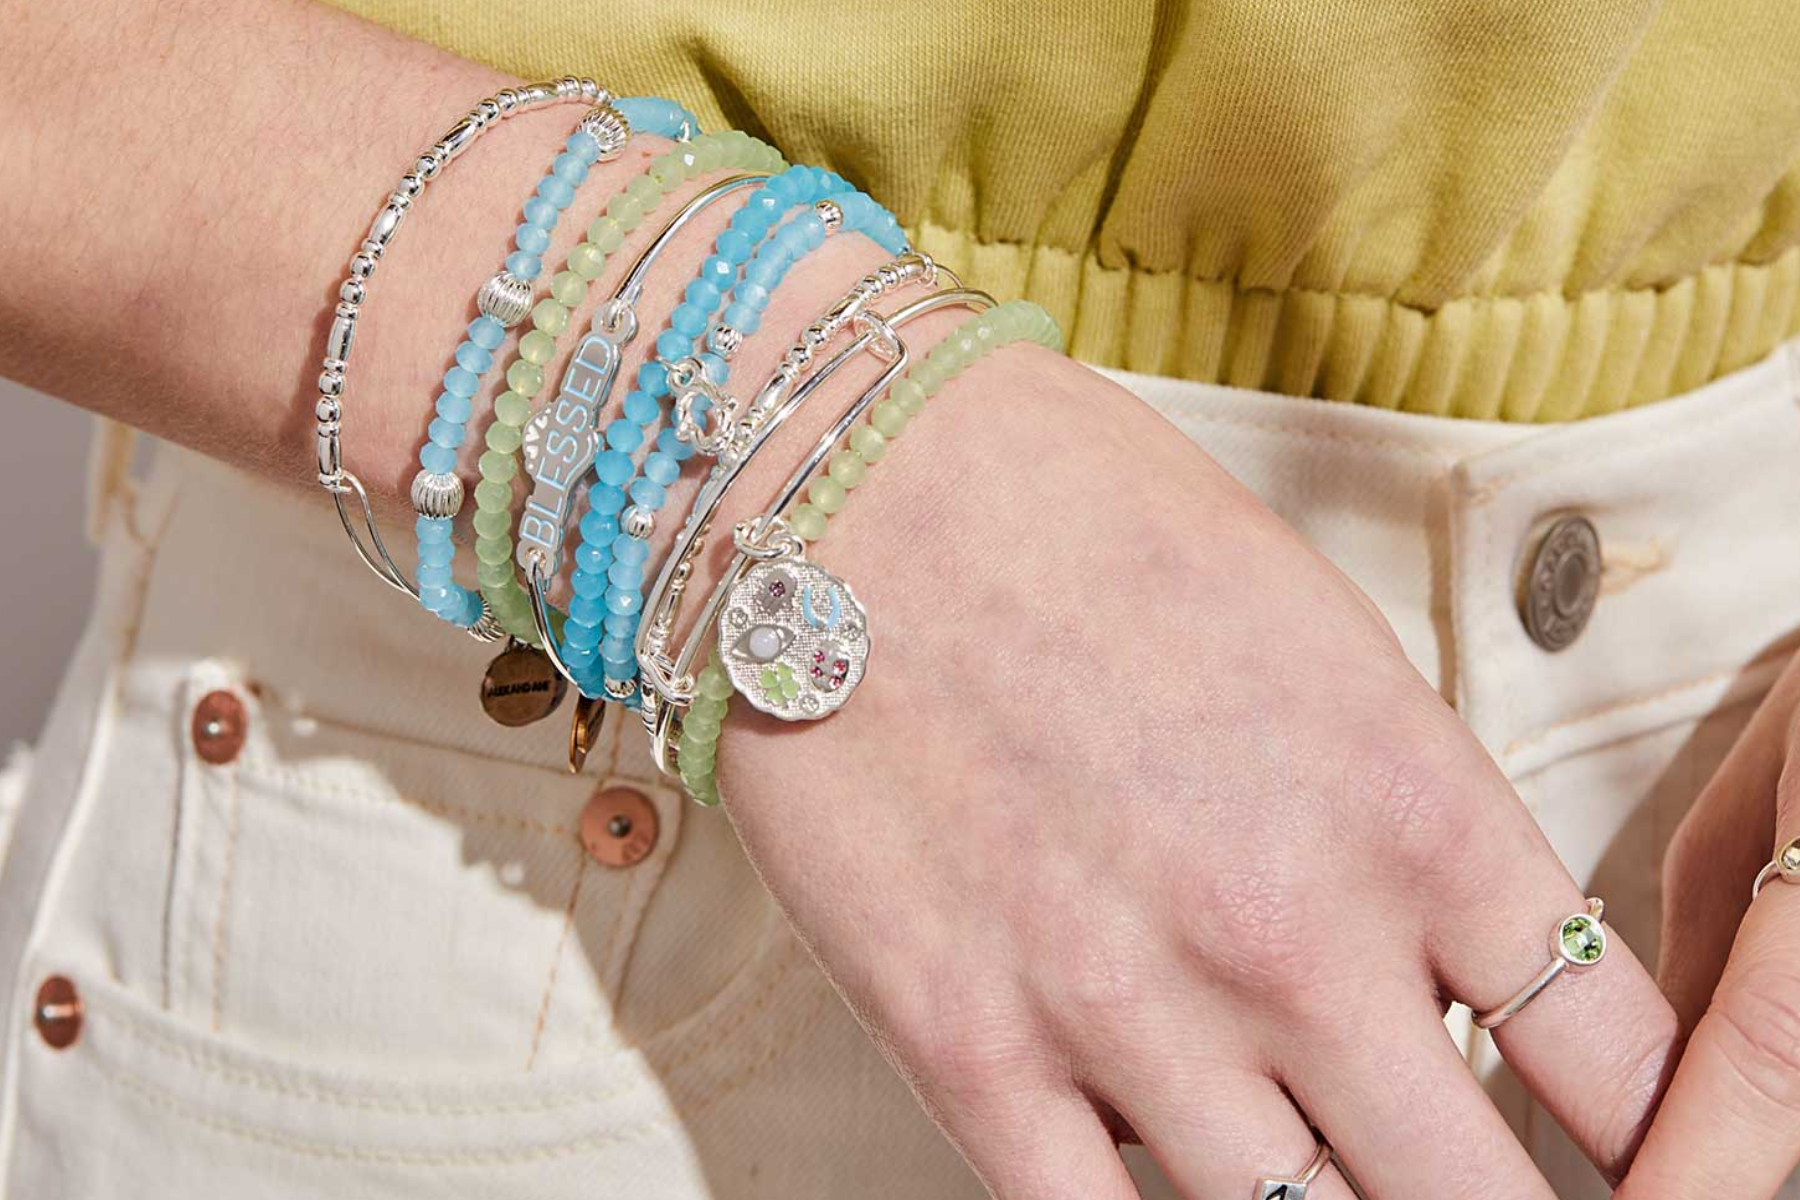 A woman's wrist is adorned with stacked bracelets